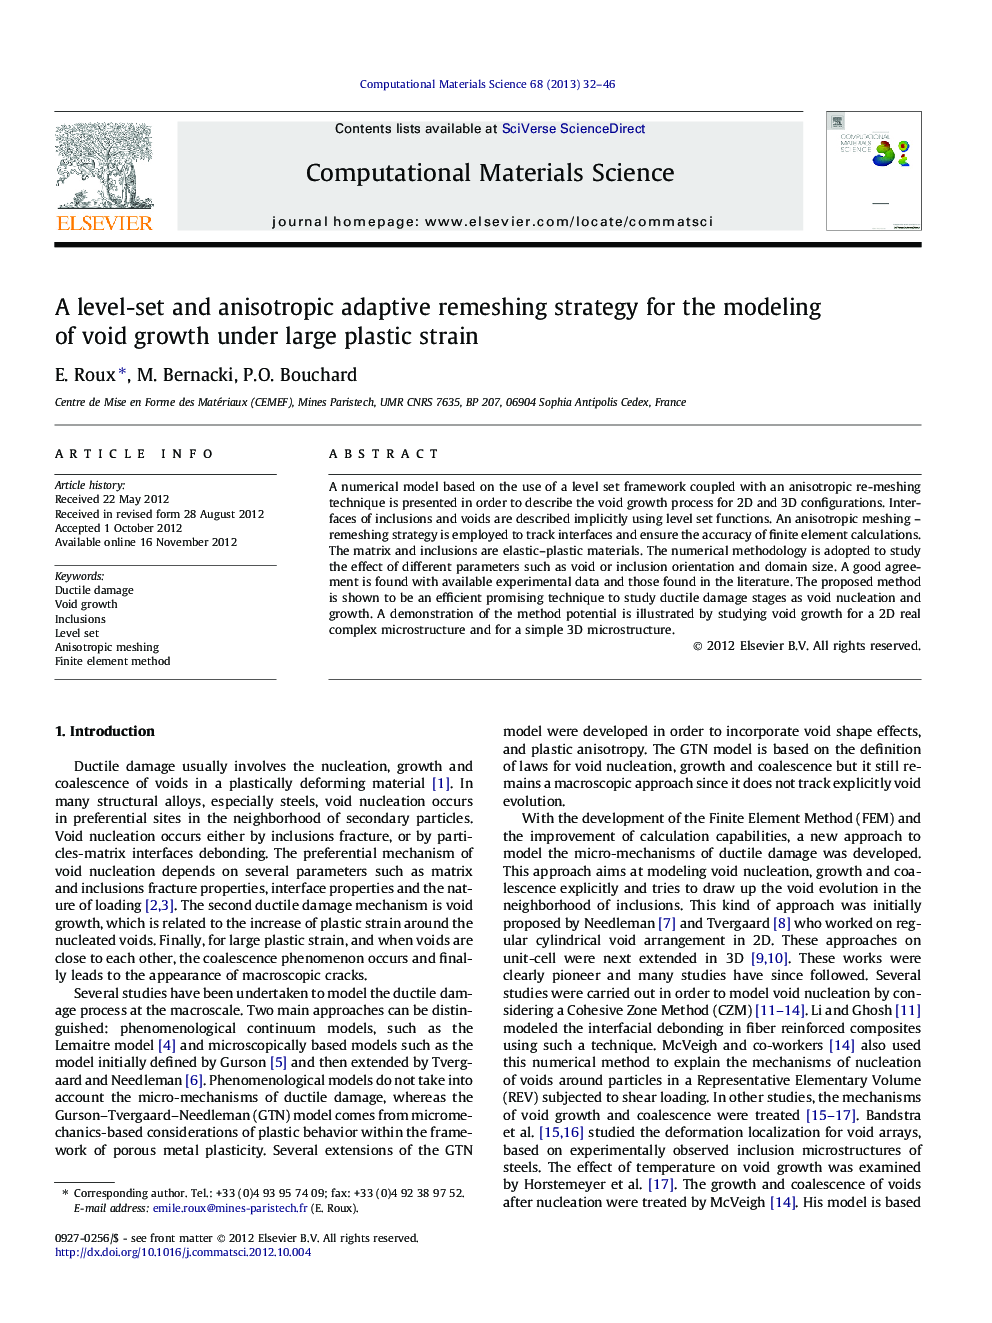 A level-set and anisotropic adaptive remeshing strategy for the modeling of void growth under large plastic strain